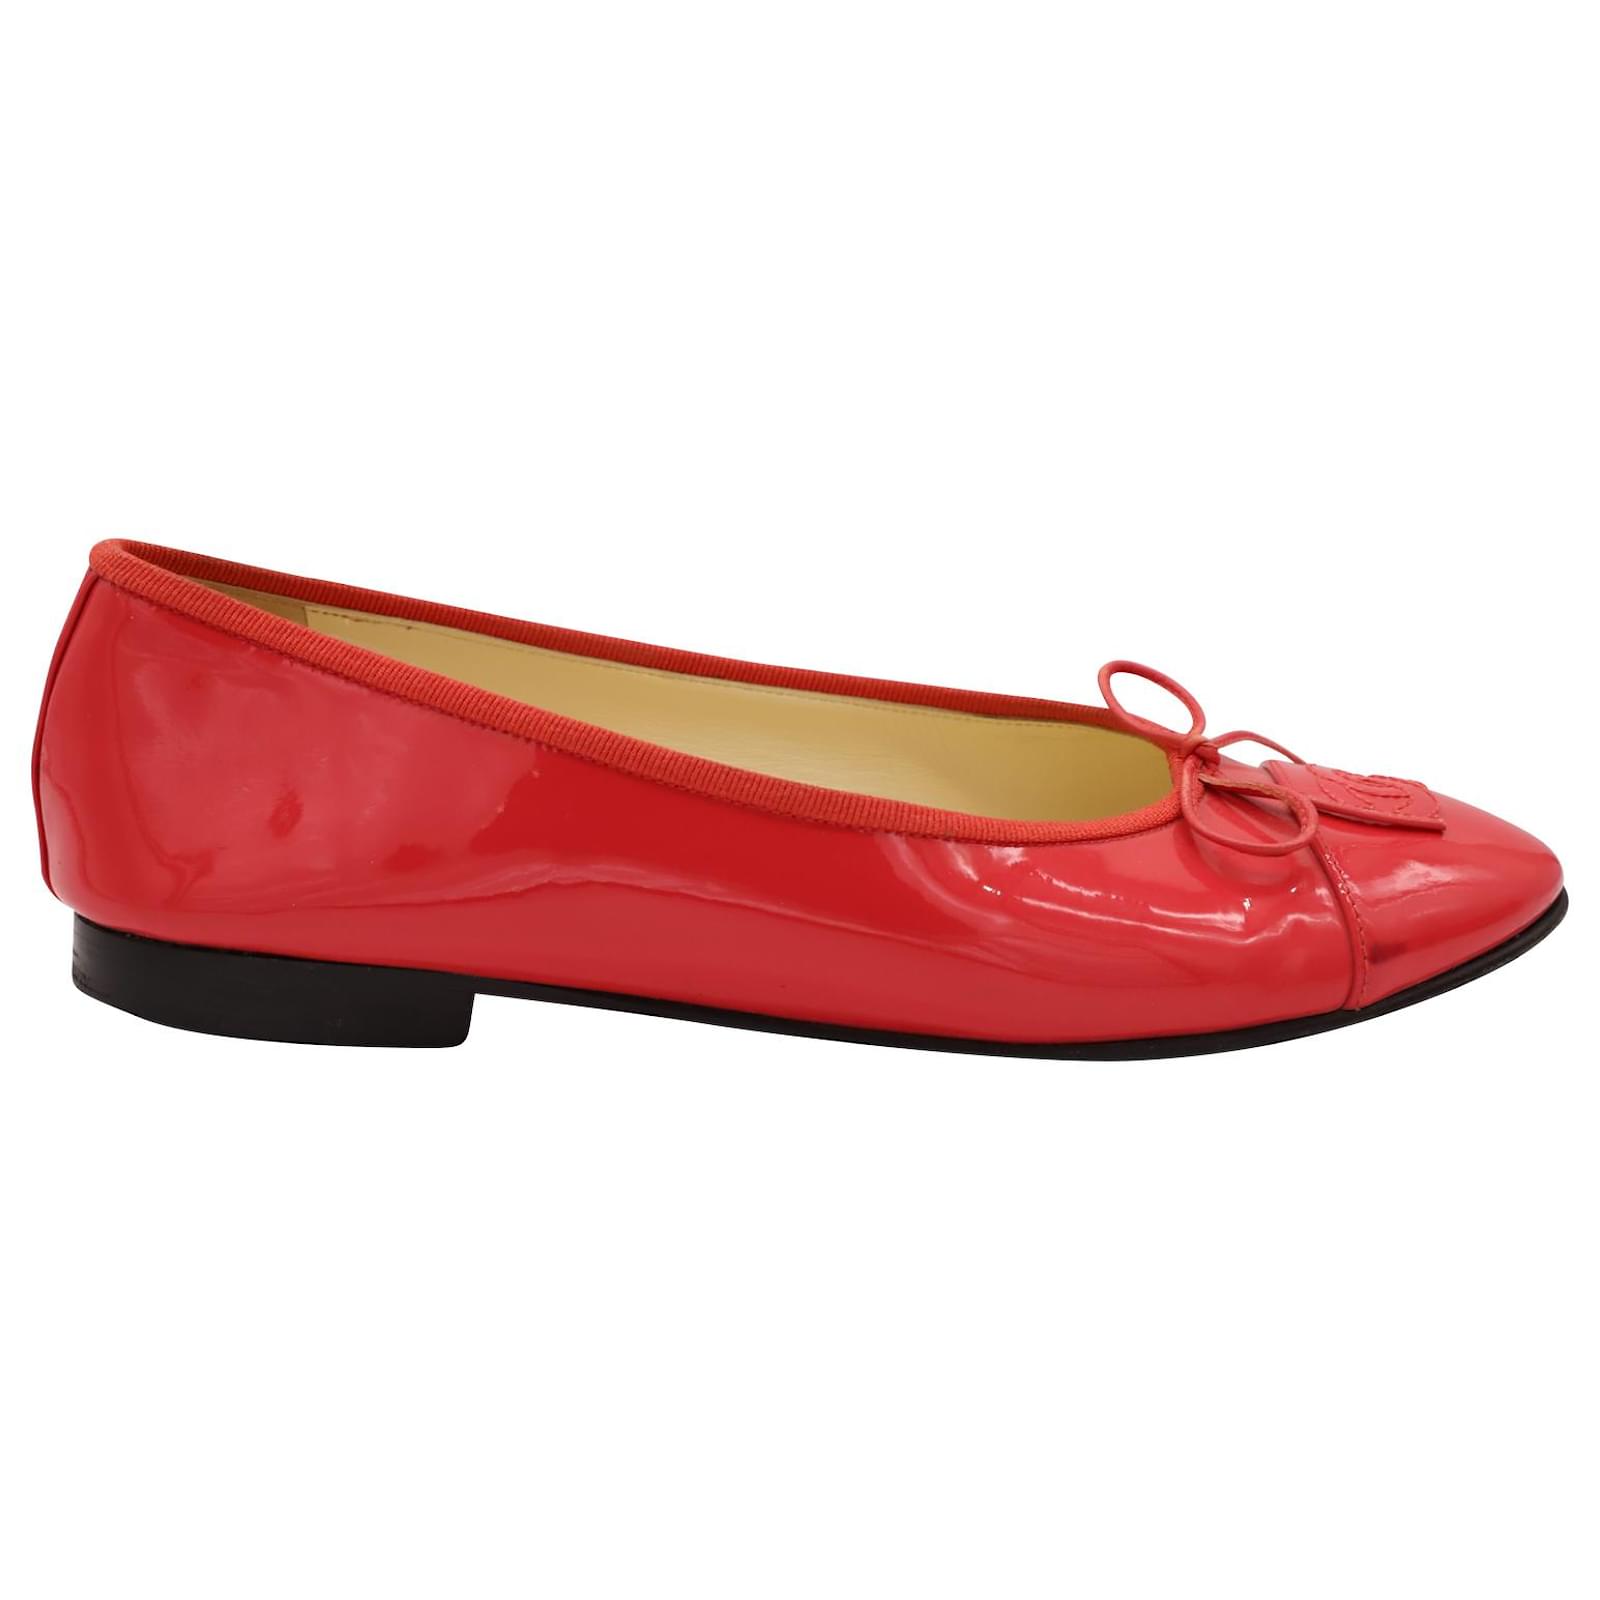 Chanel CC Cap Toe Ballet Flats in Light Red Patent Leather ref